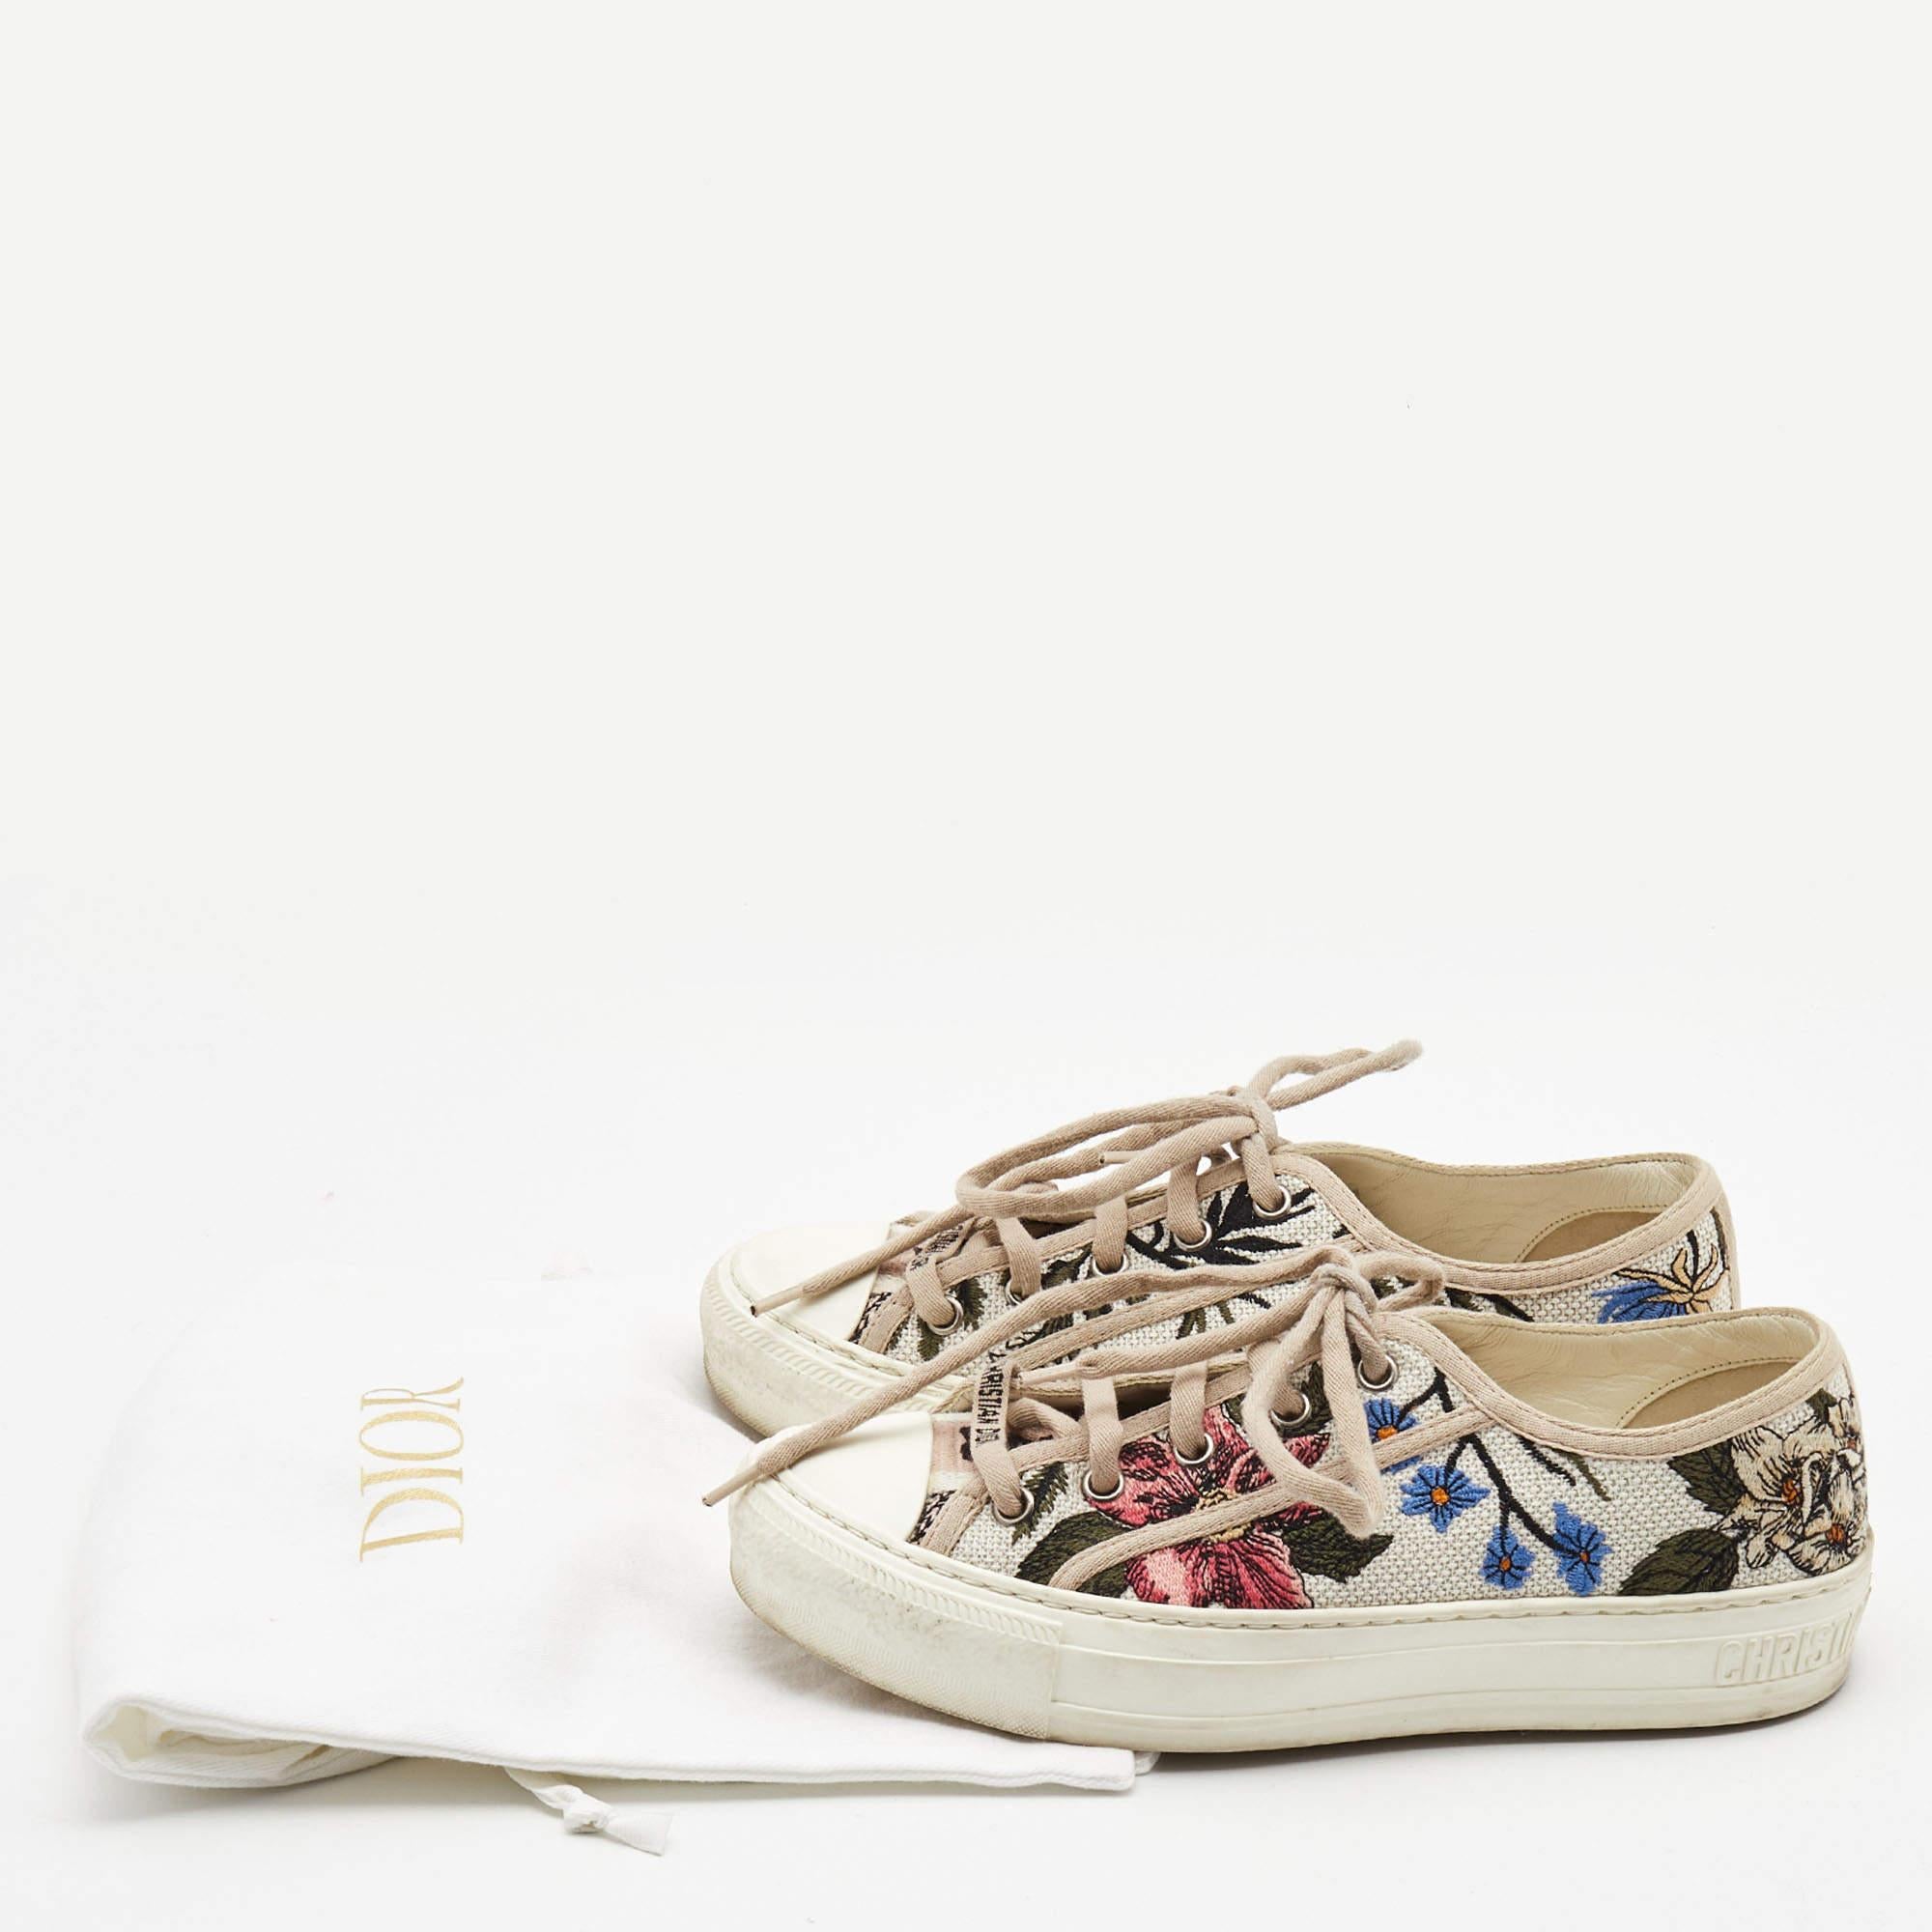 Dior White Embroidered Canvas Walk'n'Dior Sneakers Size 36 5